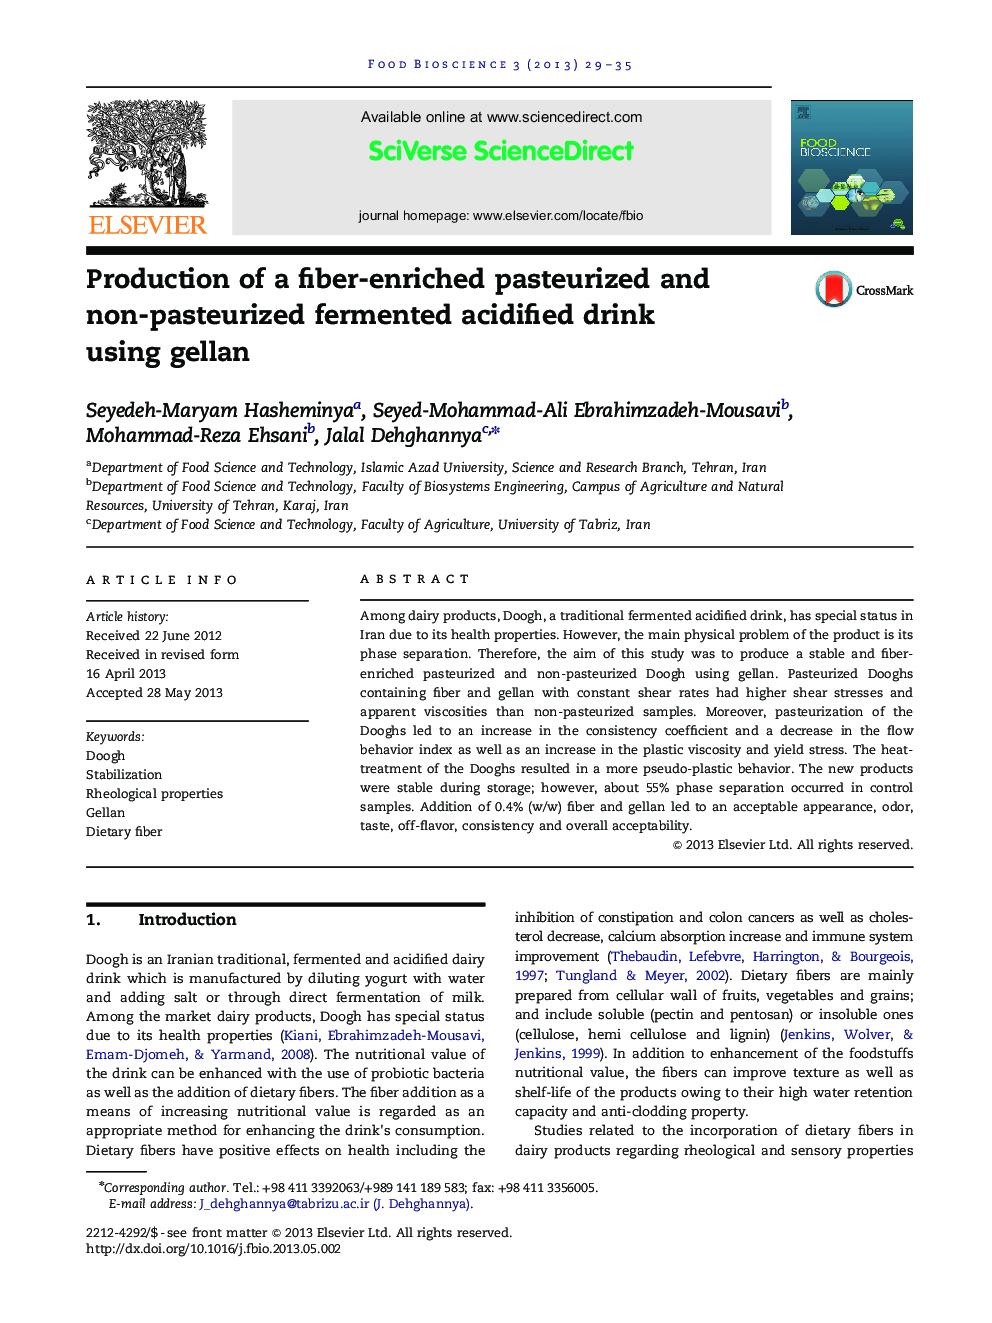 Production of a fiber-enriched pasteurized and non-pasteurized fermented acidified drink using gellan